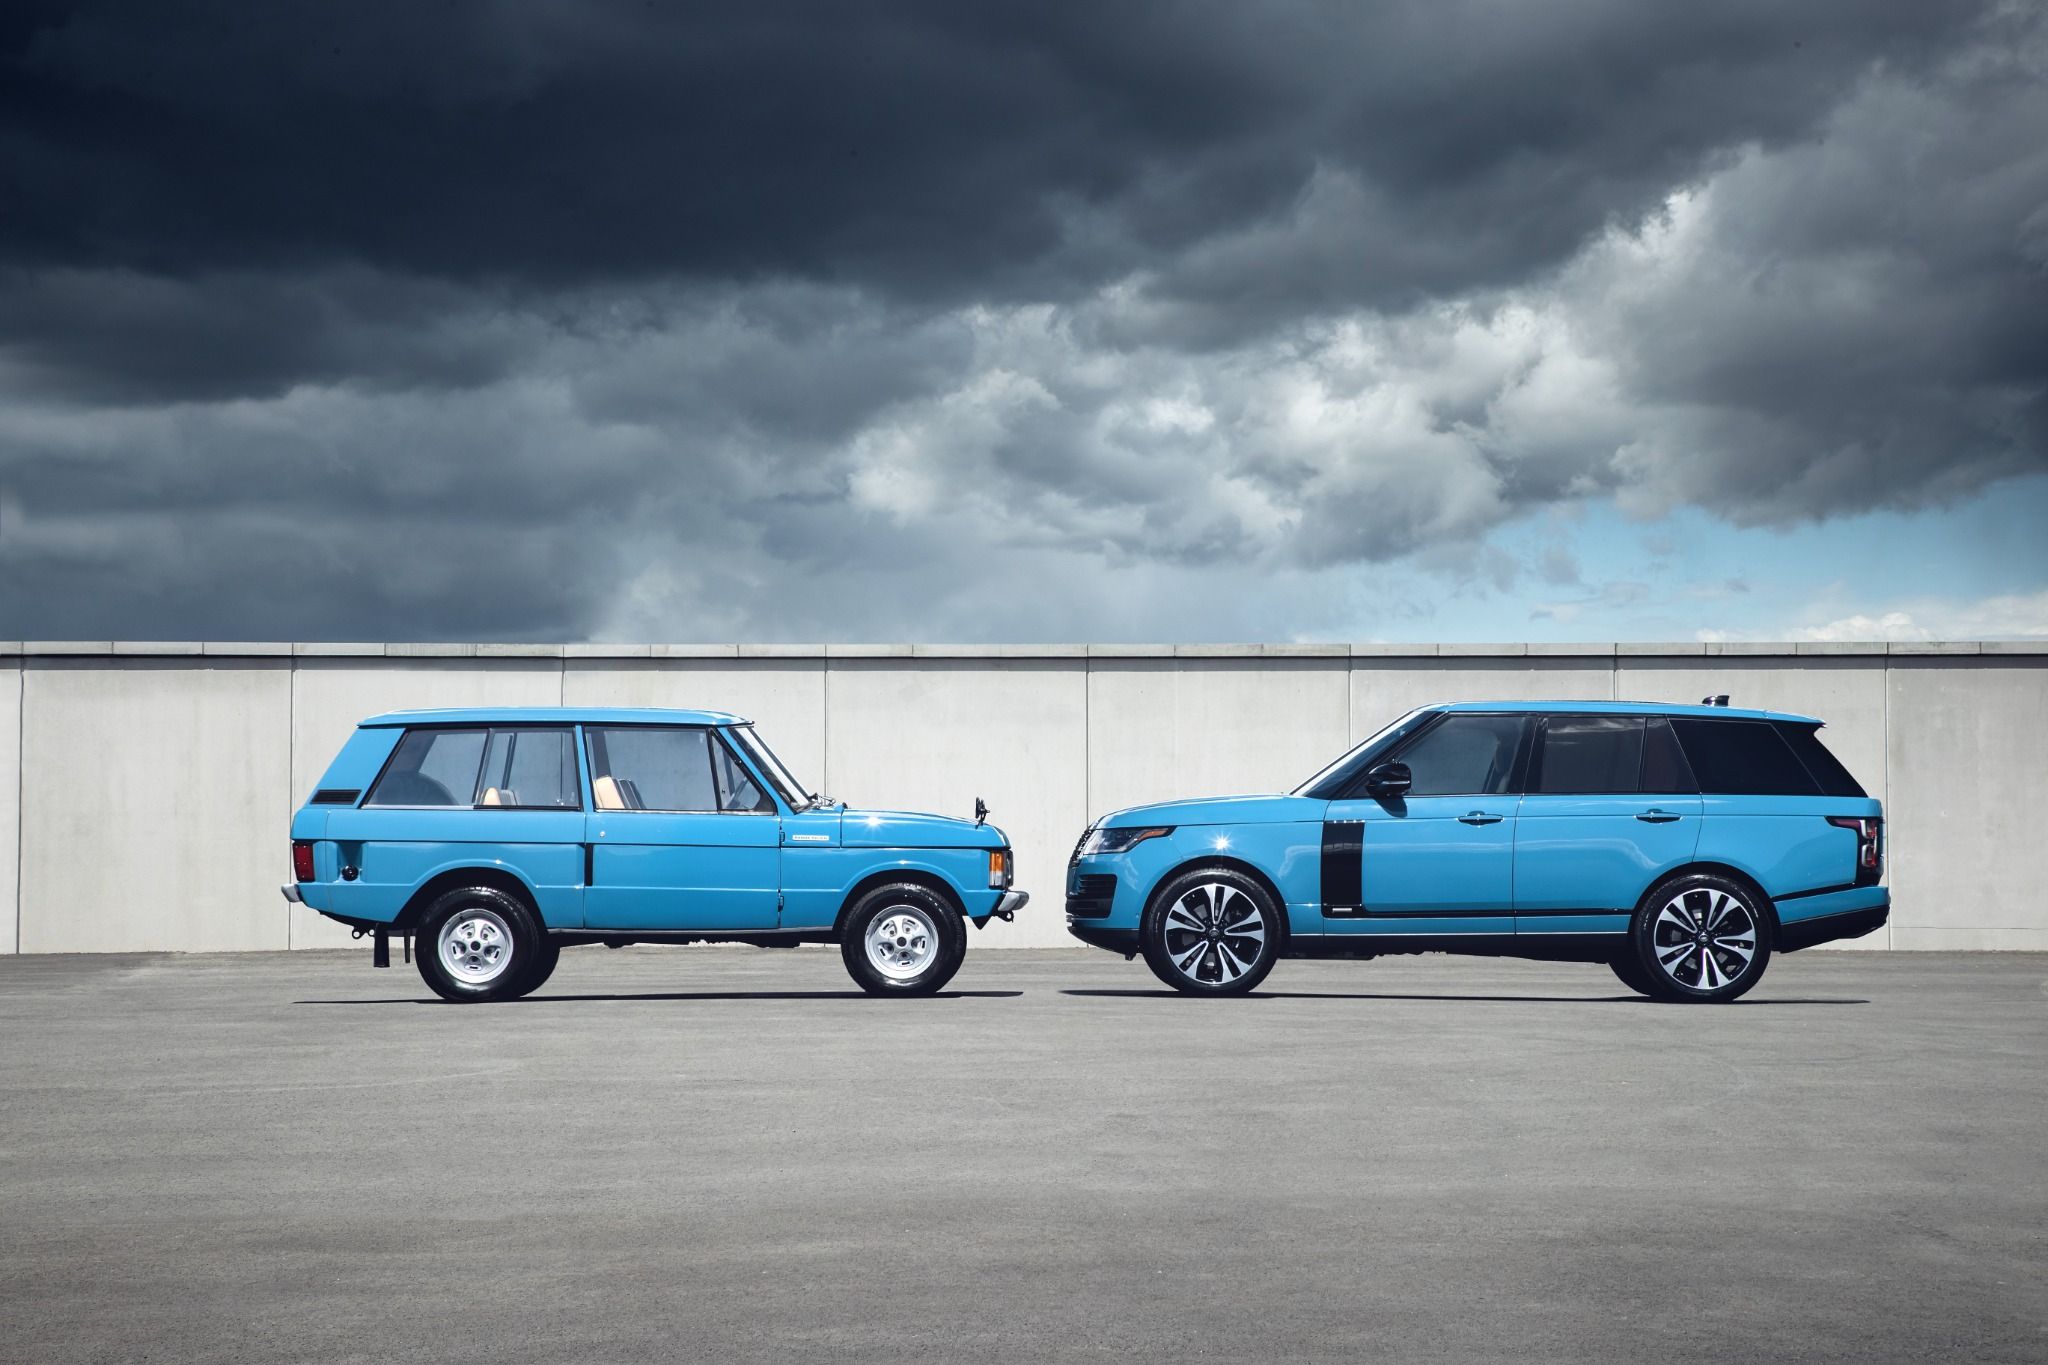 The history of the Range Rover: Five generations of this luxury SUV image